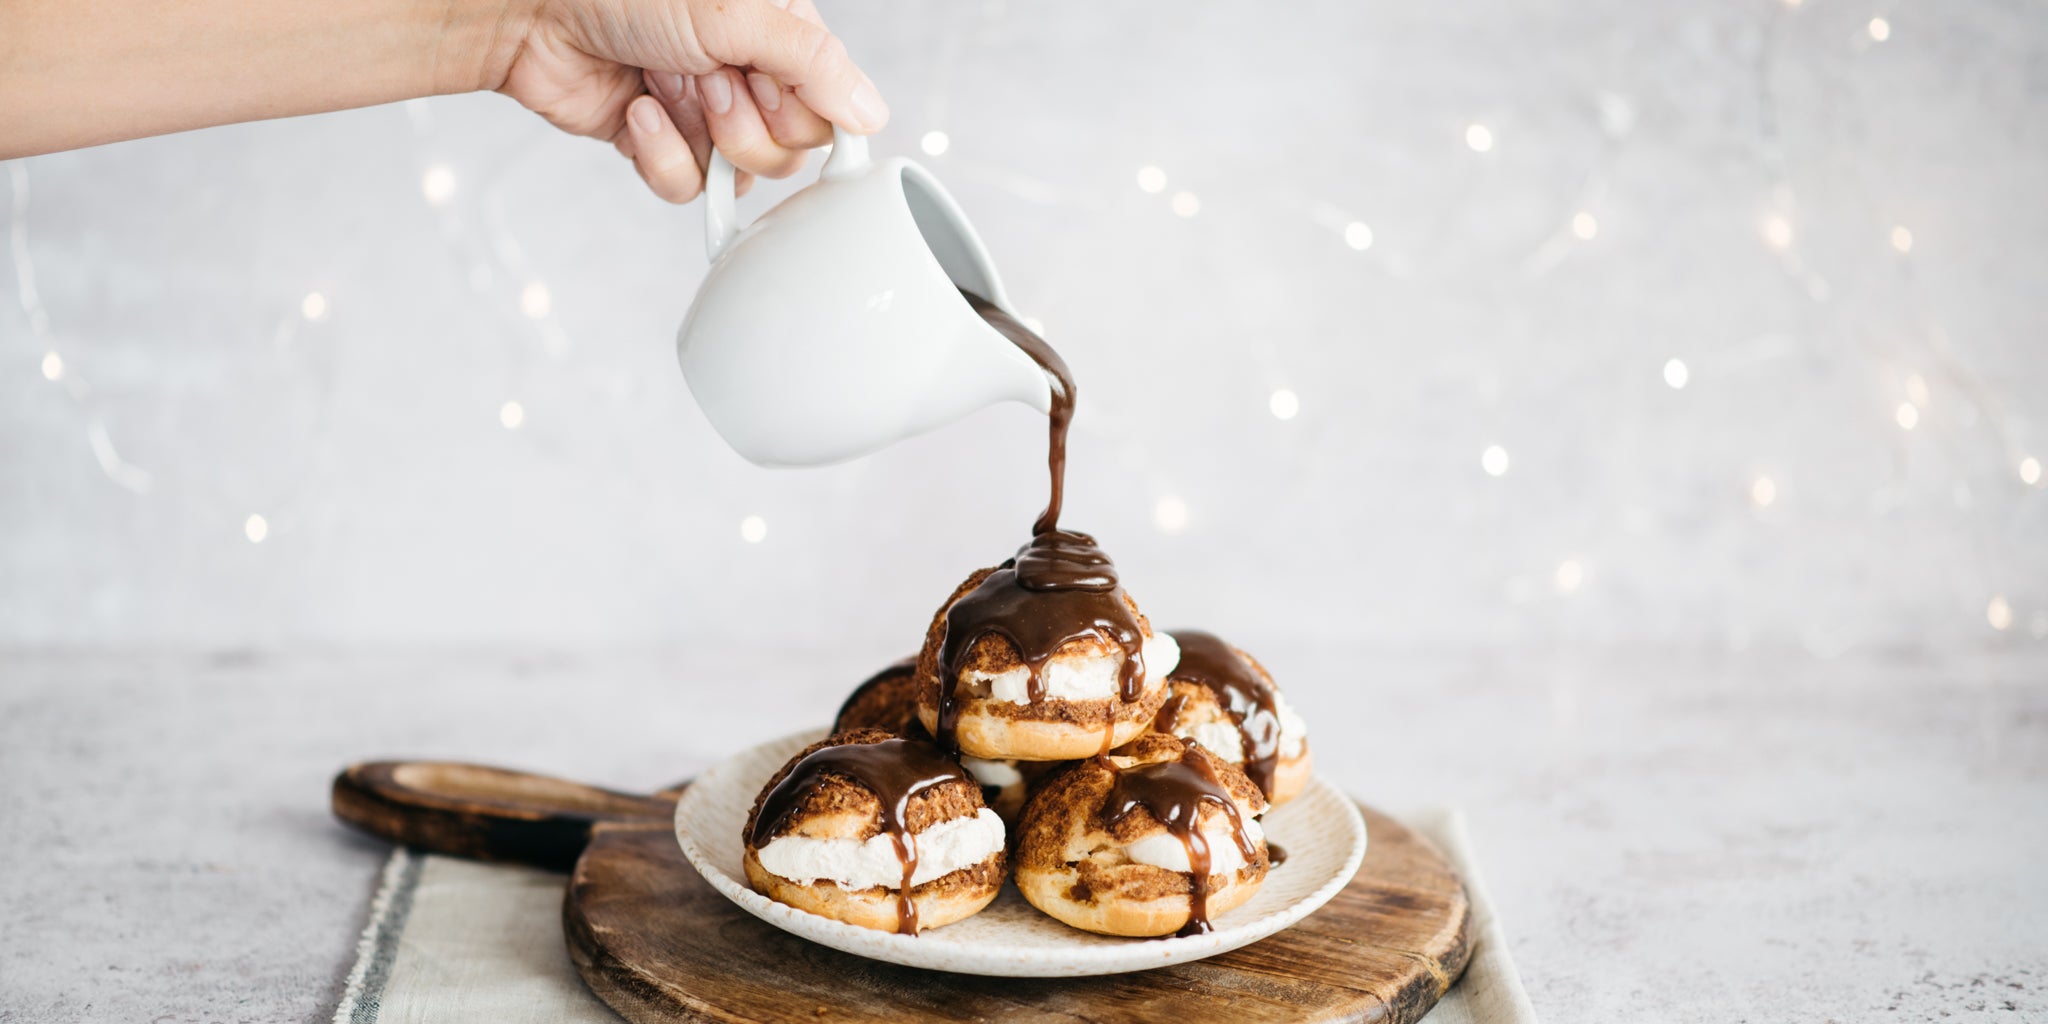 Hand pouring a jug of toffee sauce over a plate of profiteroles